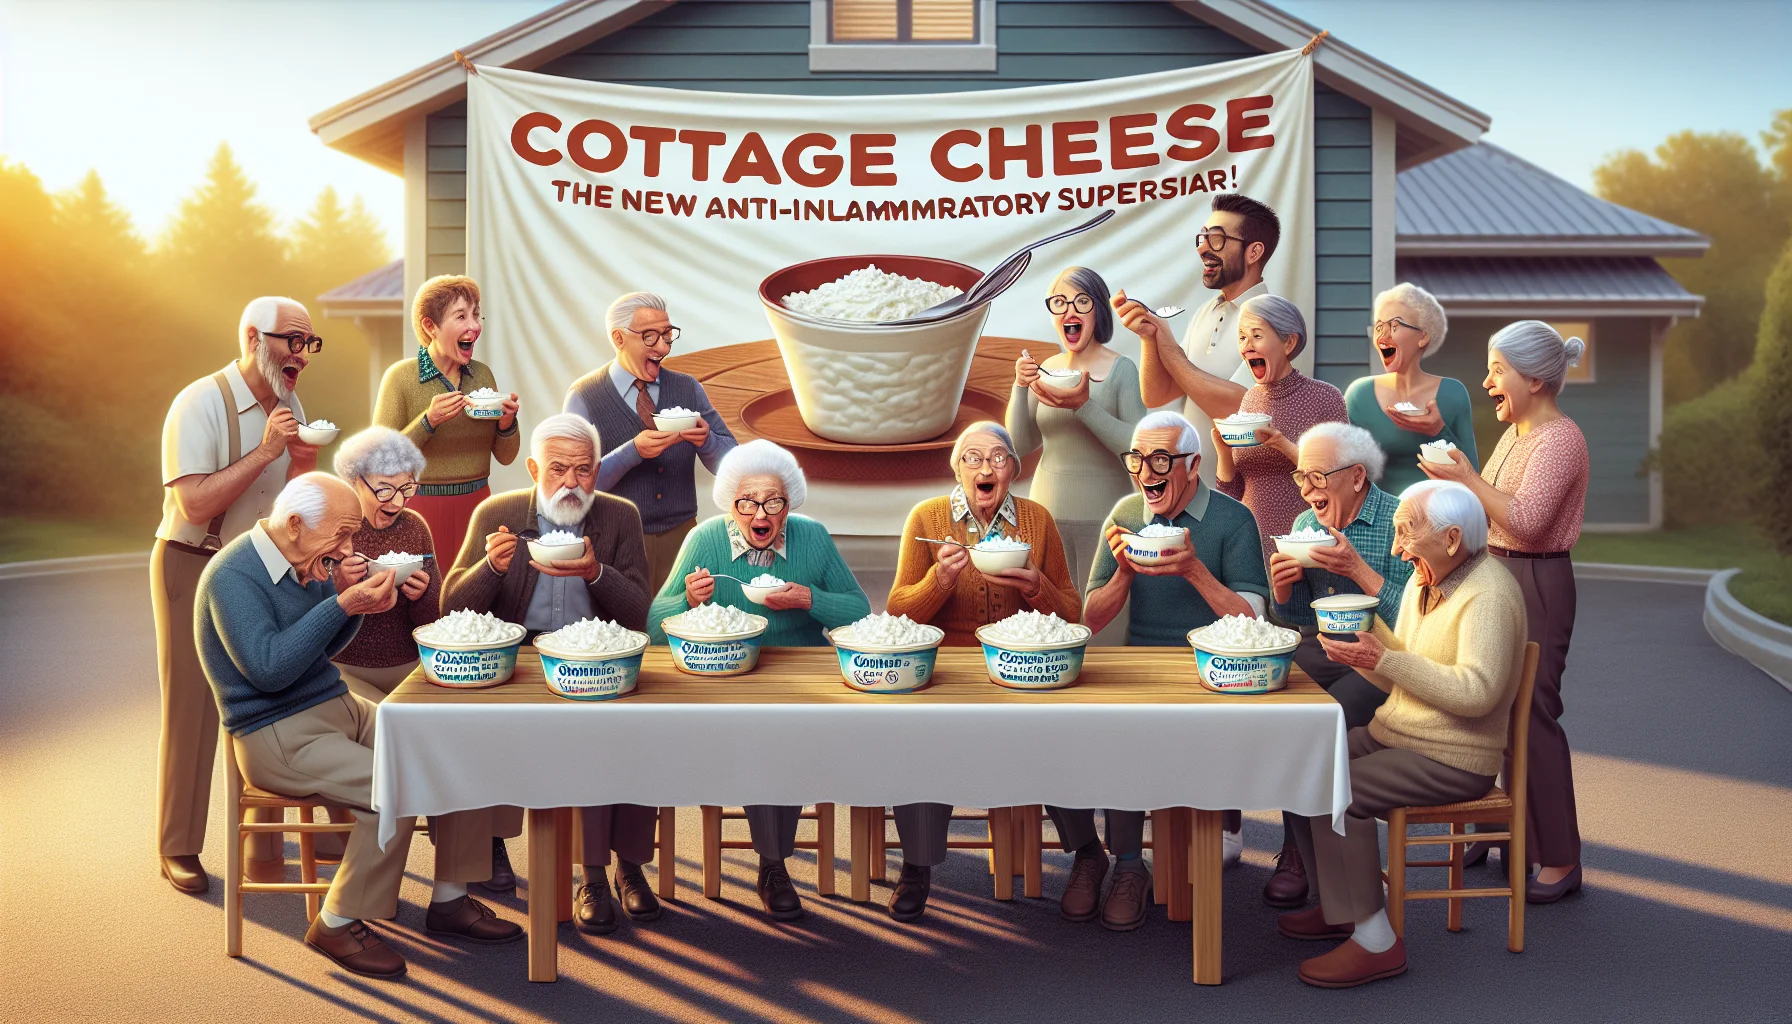 Create a humorous, realistic image showcasing the notion that cottage cheese has anti-inflammatory properties. Contextualize this with a scenario: it's a sunny afternoon at a retirement lifestyle center where elderly individuals of various descents like Hispanic, Caucasian, and South Asian are gathered for a 'Healthy Eating Club' meeting. Each elder is humorously engaging with their bowls of cottage cheese in various ways. Some are surprisingly examining it with reading glasses, while others are joking and laughing at their new diet. Display a banner behind with the words 'Cottage Cheese: the new anti-inflammatory superstar.'